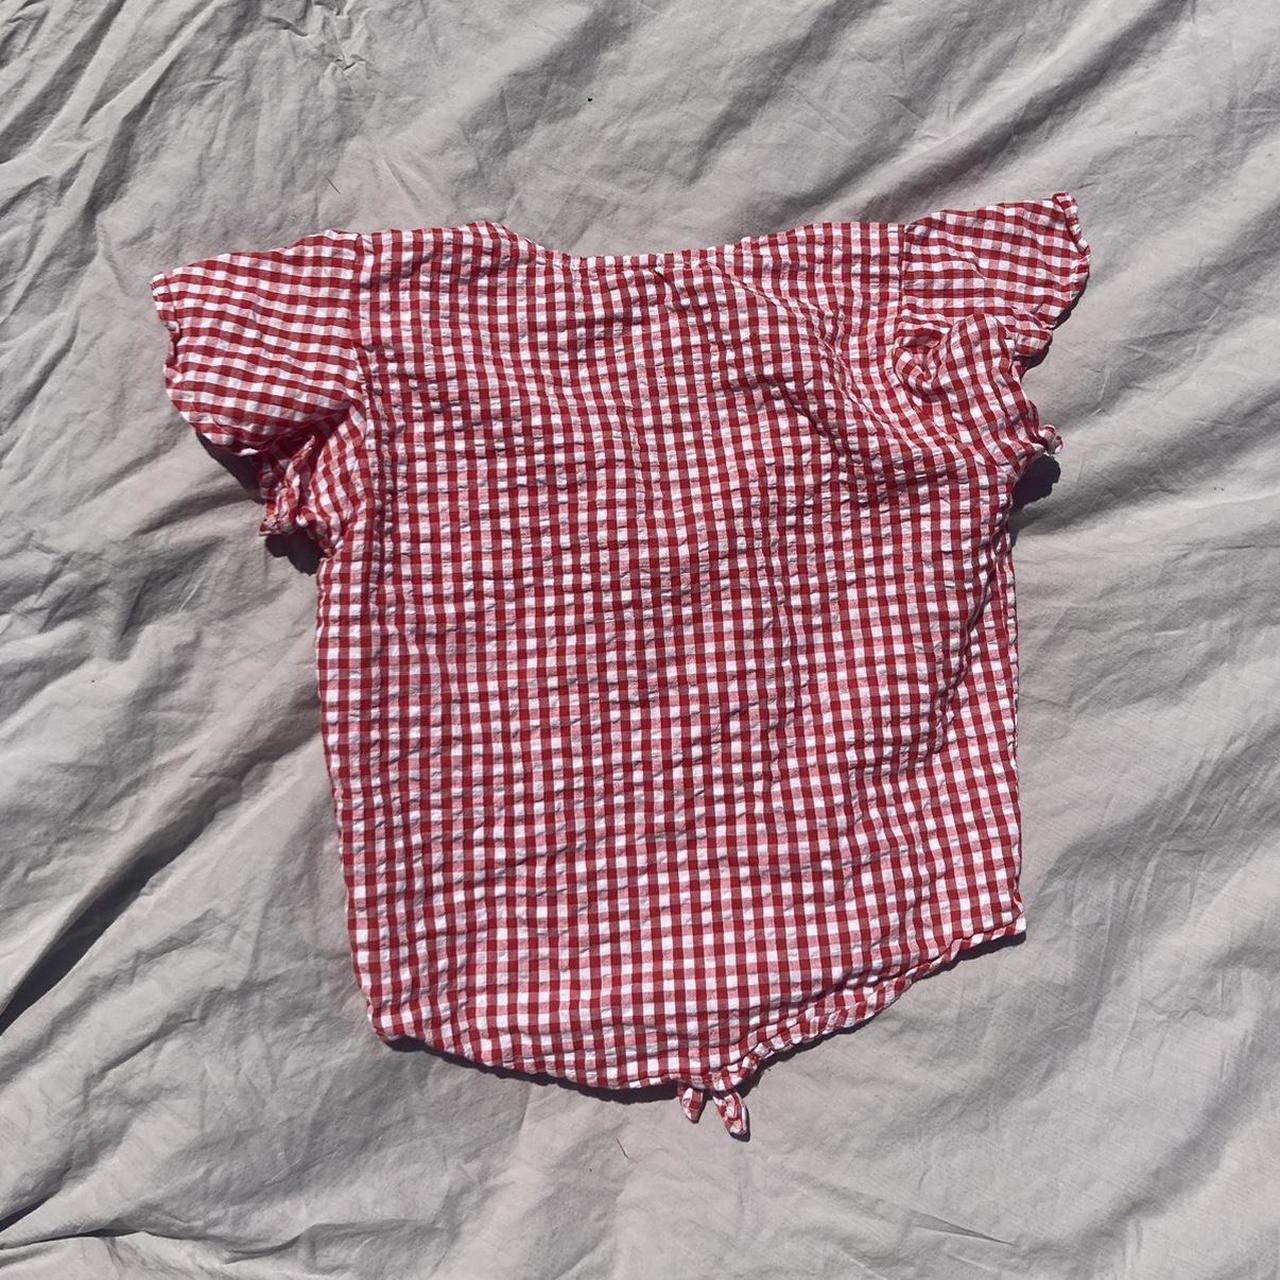 Women's White and Red Shirt | Depop